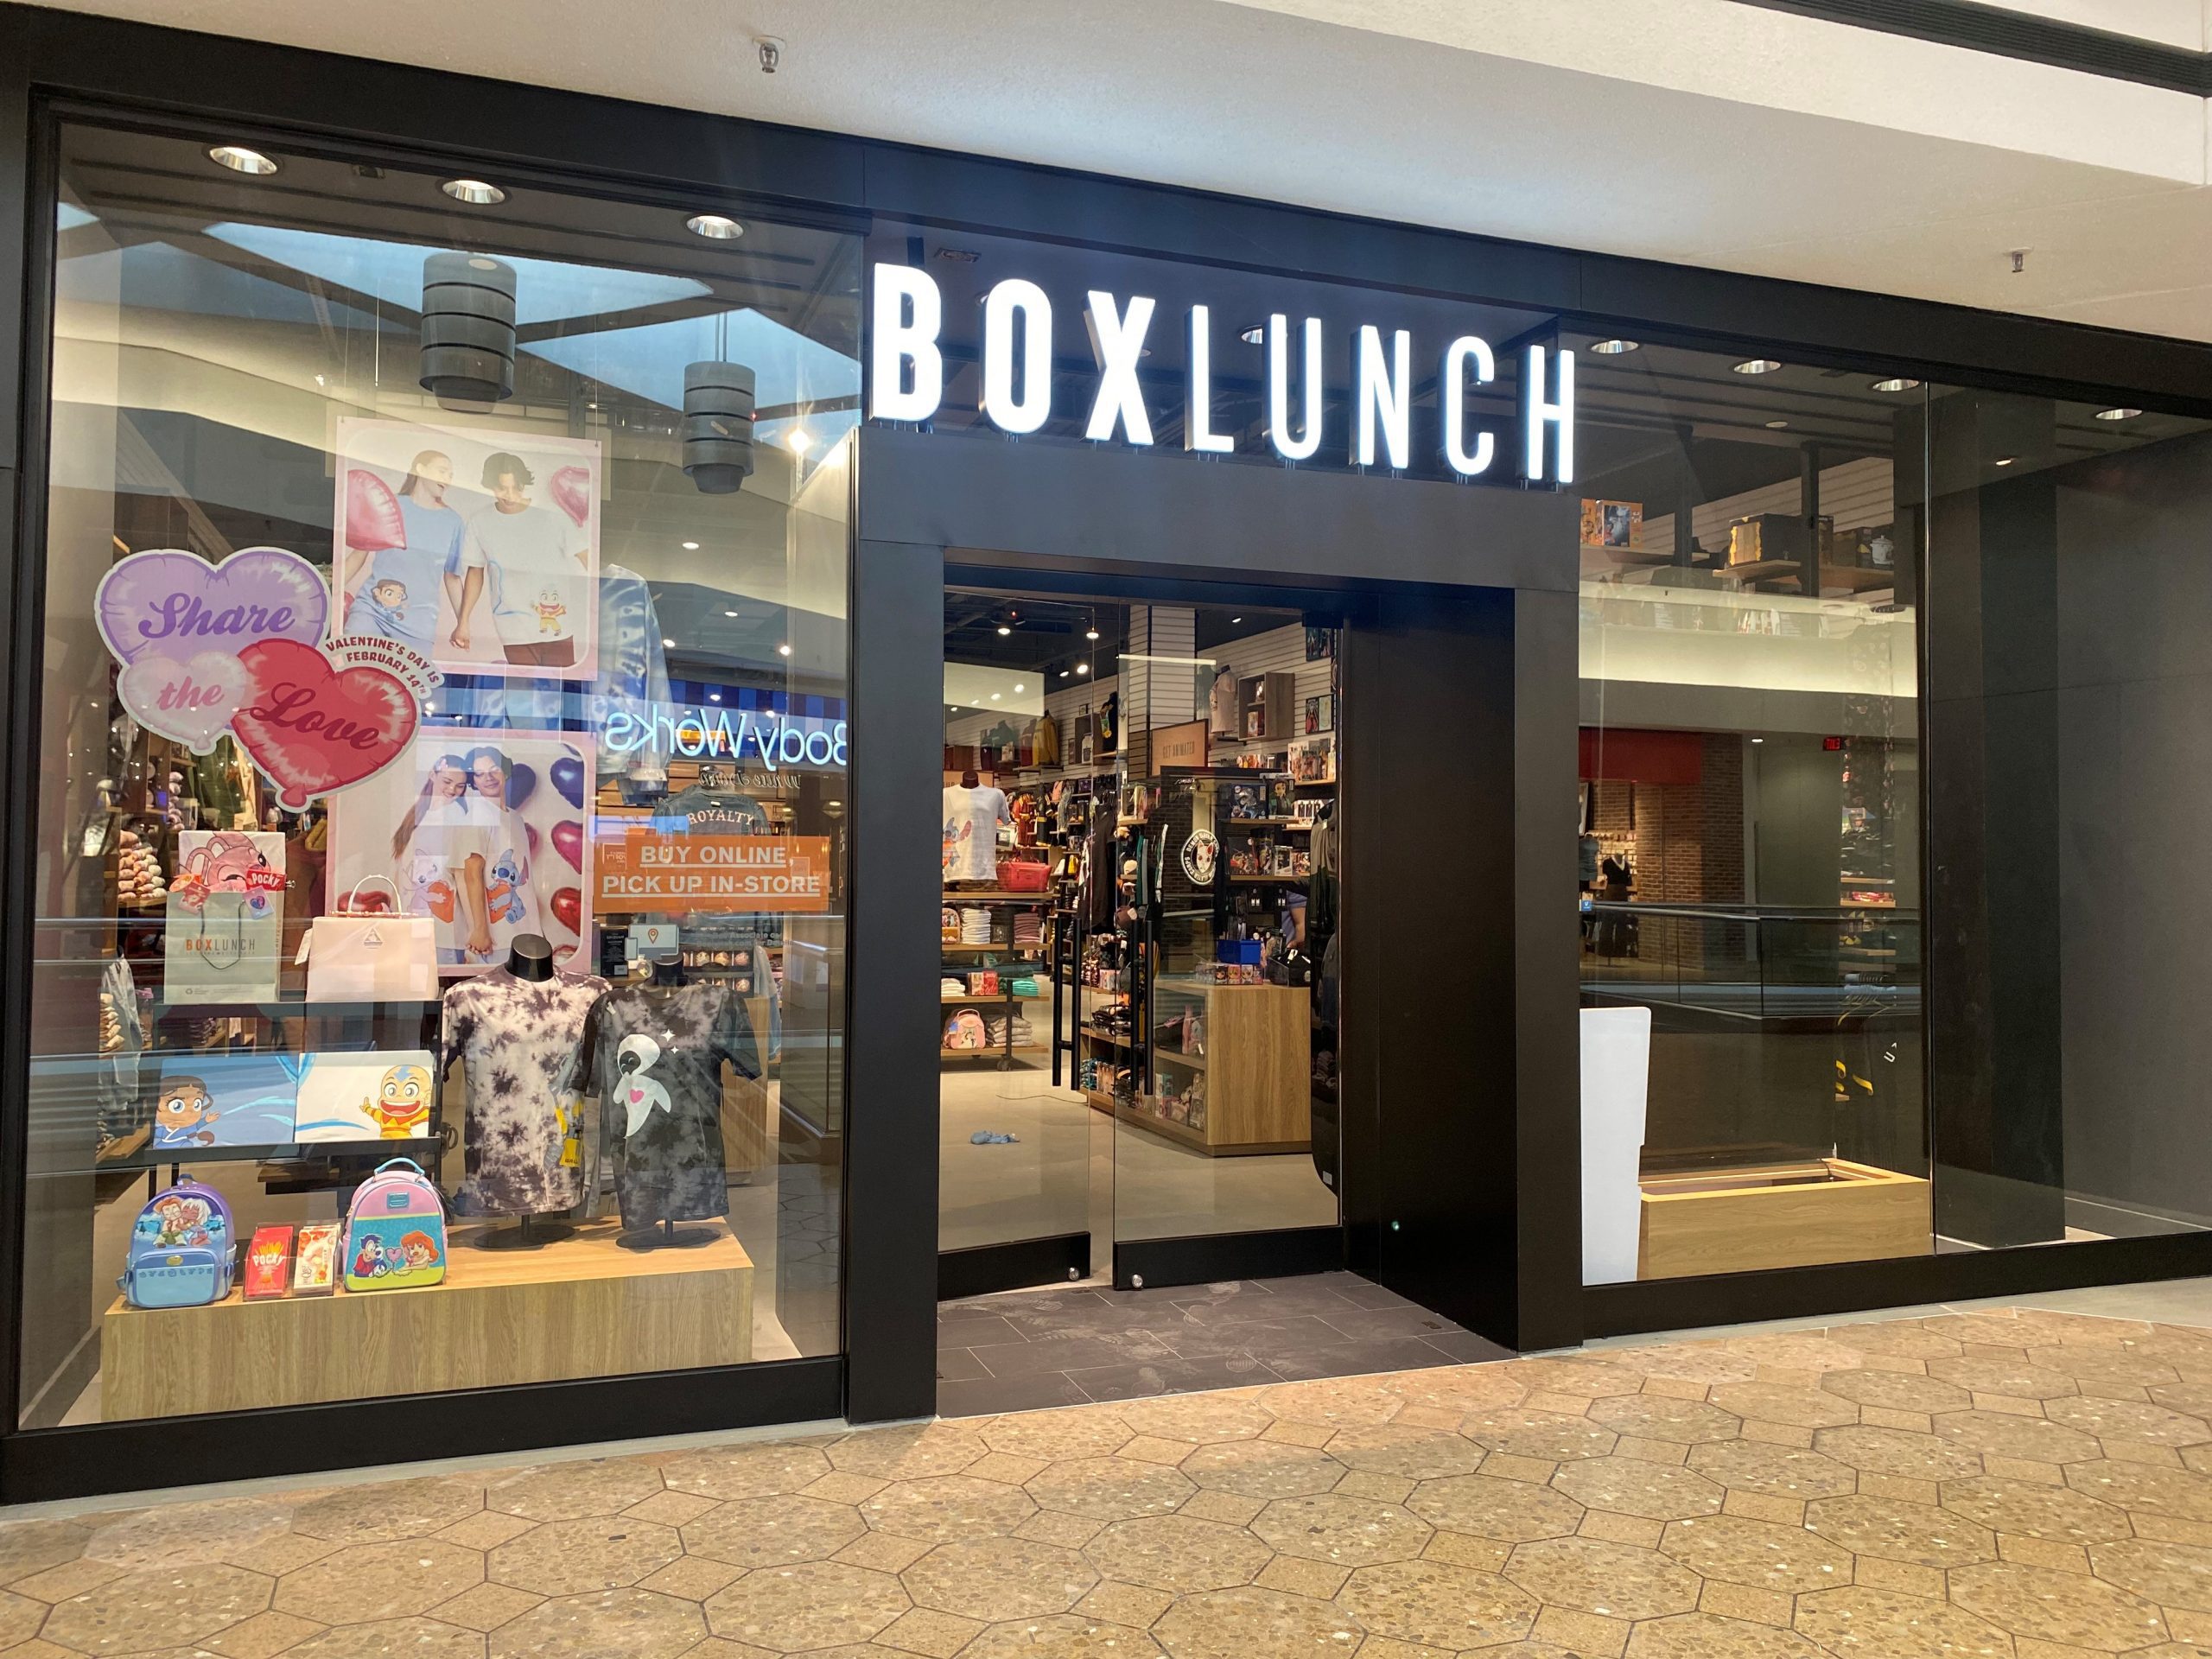 boxlunch now open at westfarms - we-ha | west hartford news